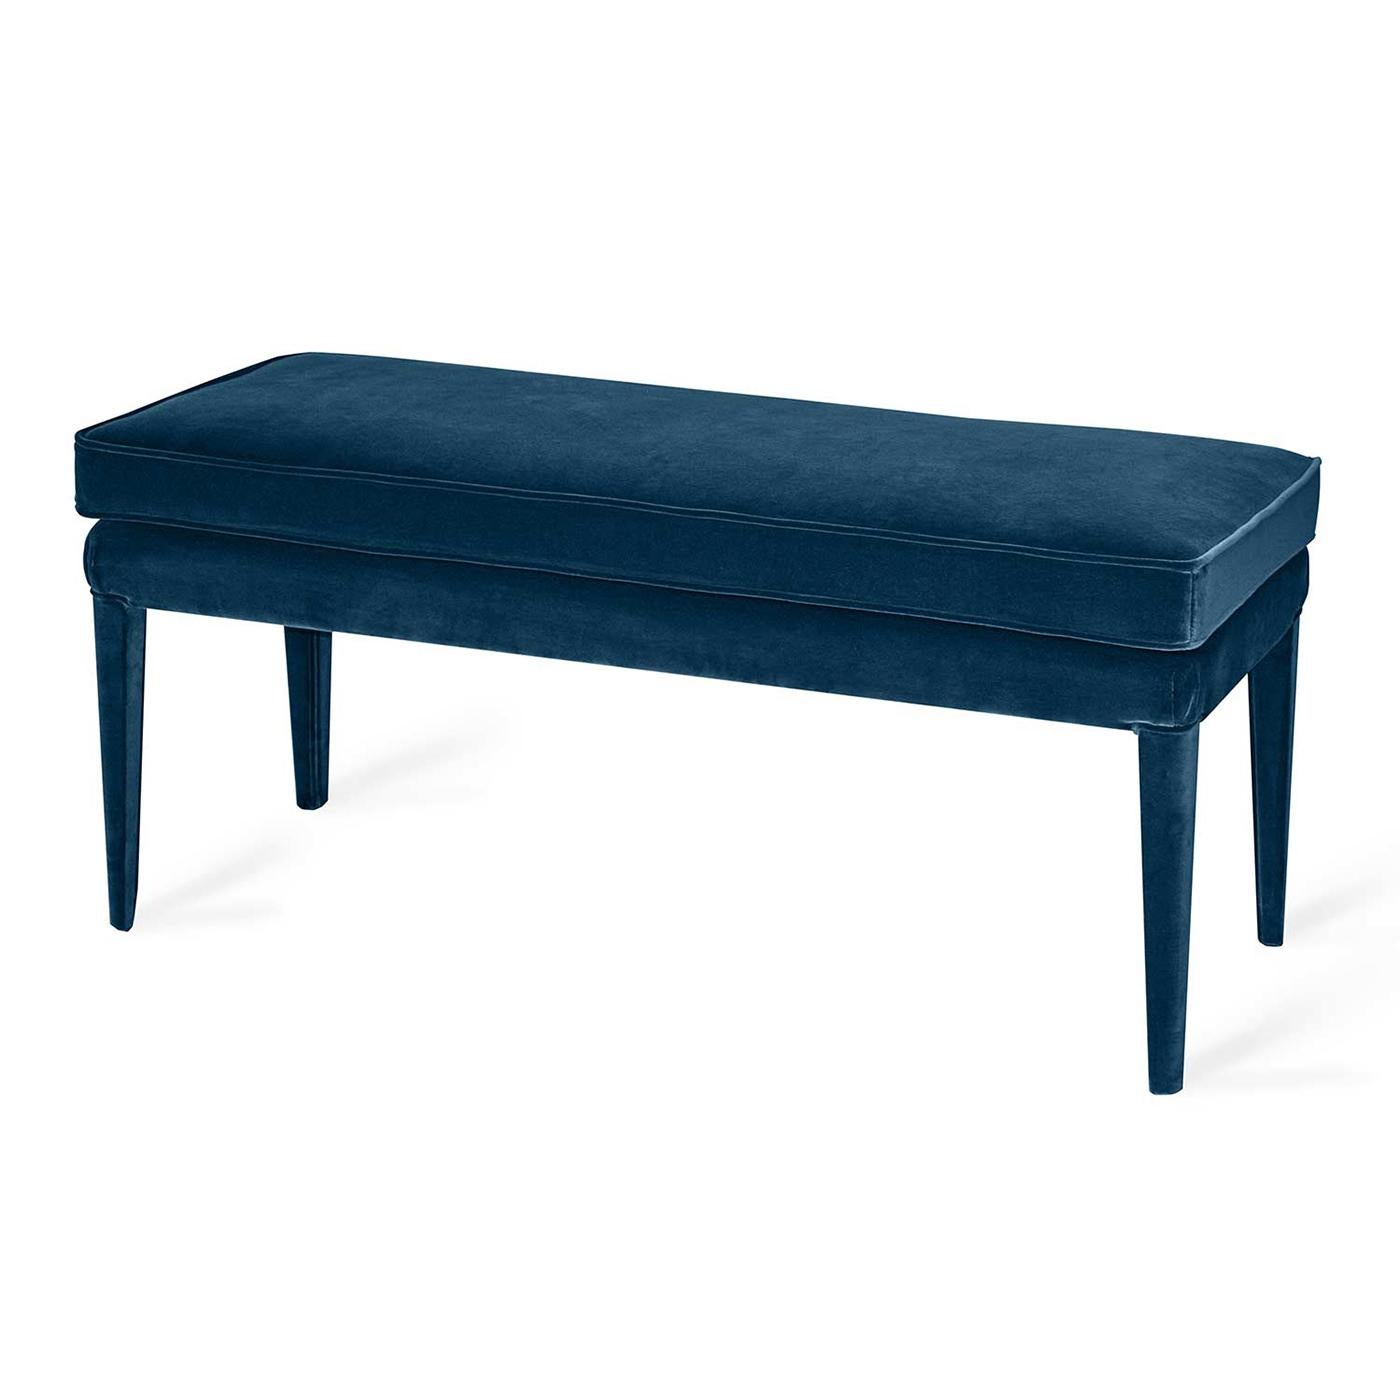 Libellula Ottoman Bench is inspired by the classical piano seat, its clear lines and luxurious finishes add a sophisticated touch to any home. This is a versatile piece that will stand the test of time in a luxurious hallway, in a living room or at